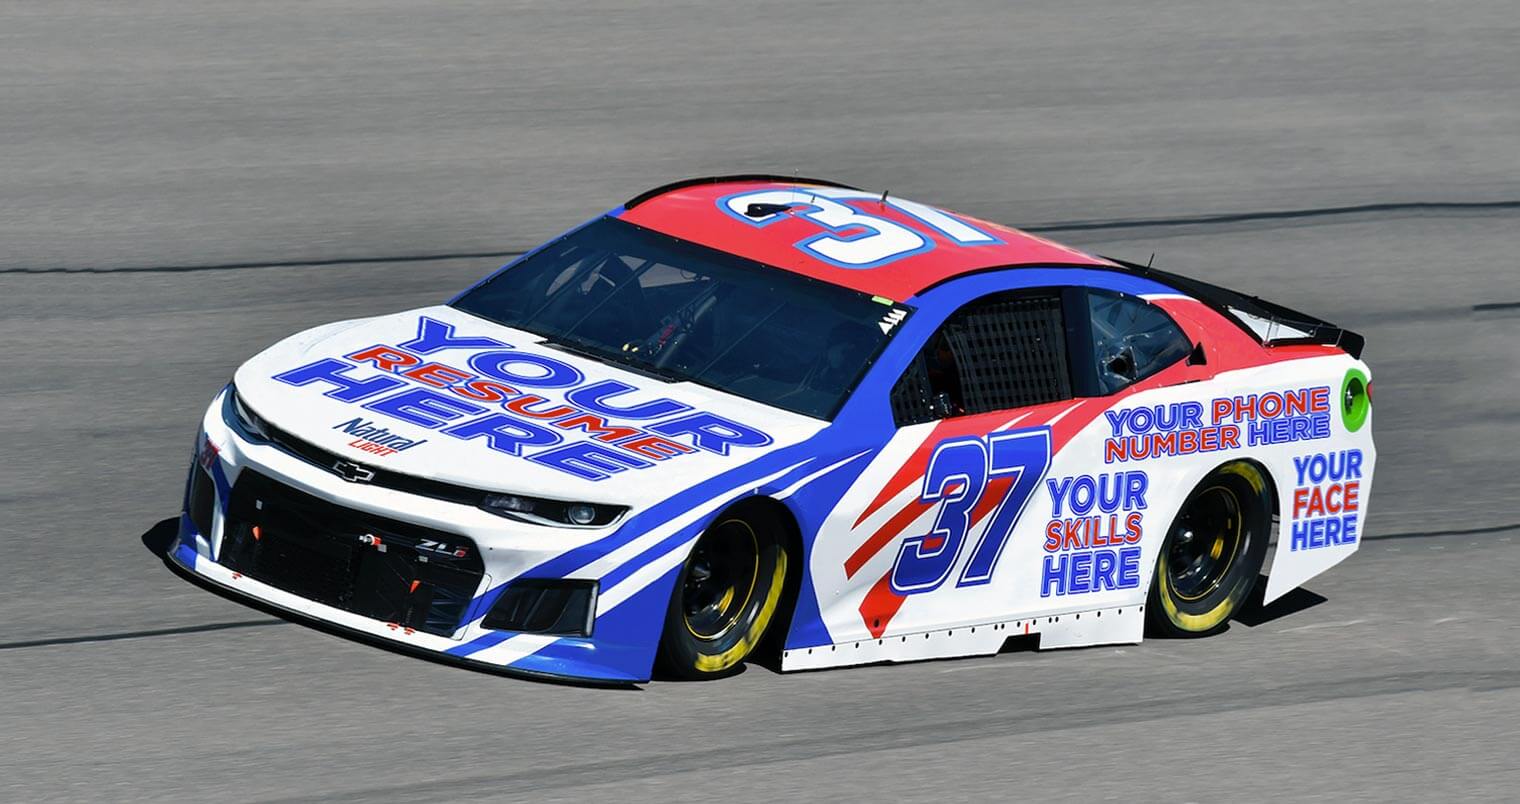 Post Your Resume on a Nascar Racecar with Natural Light, featured image